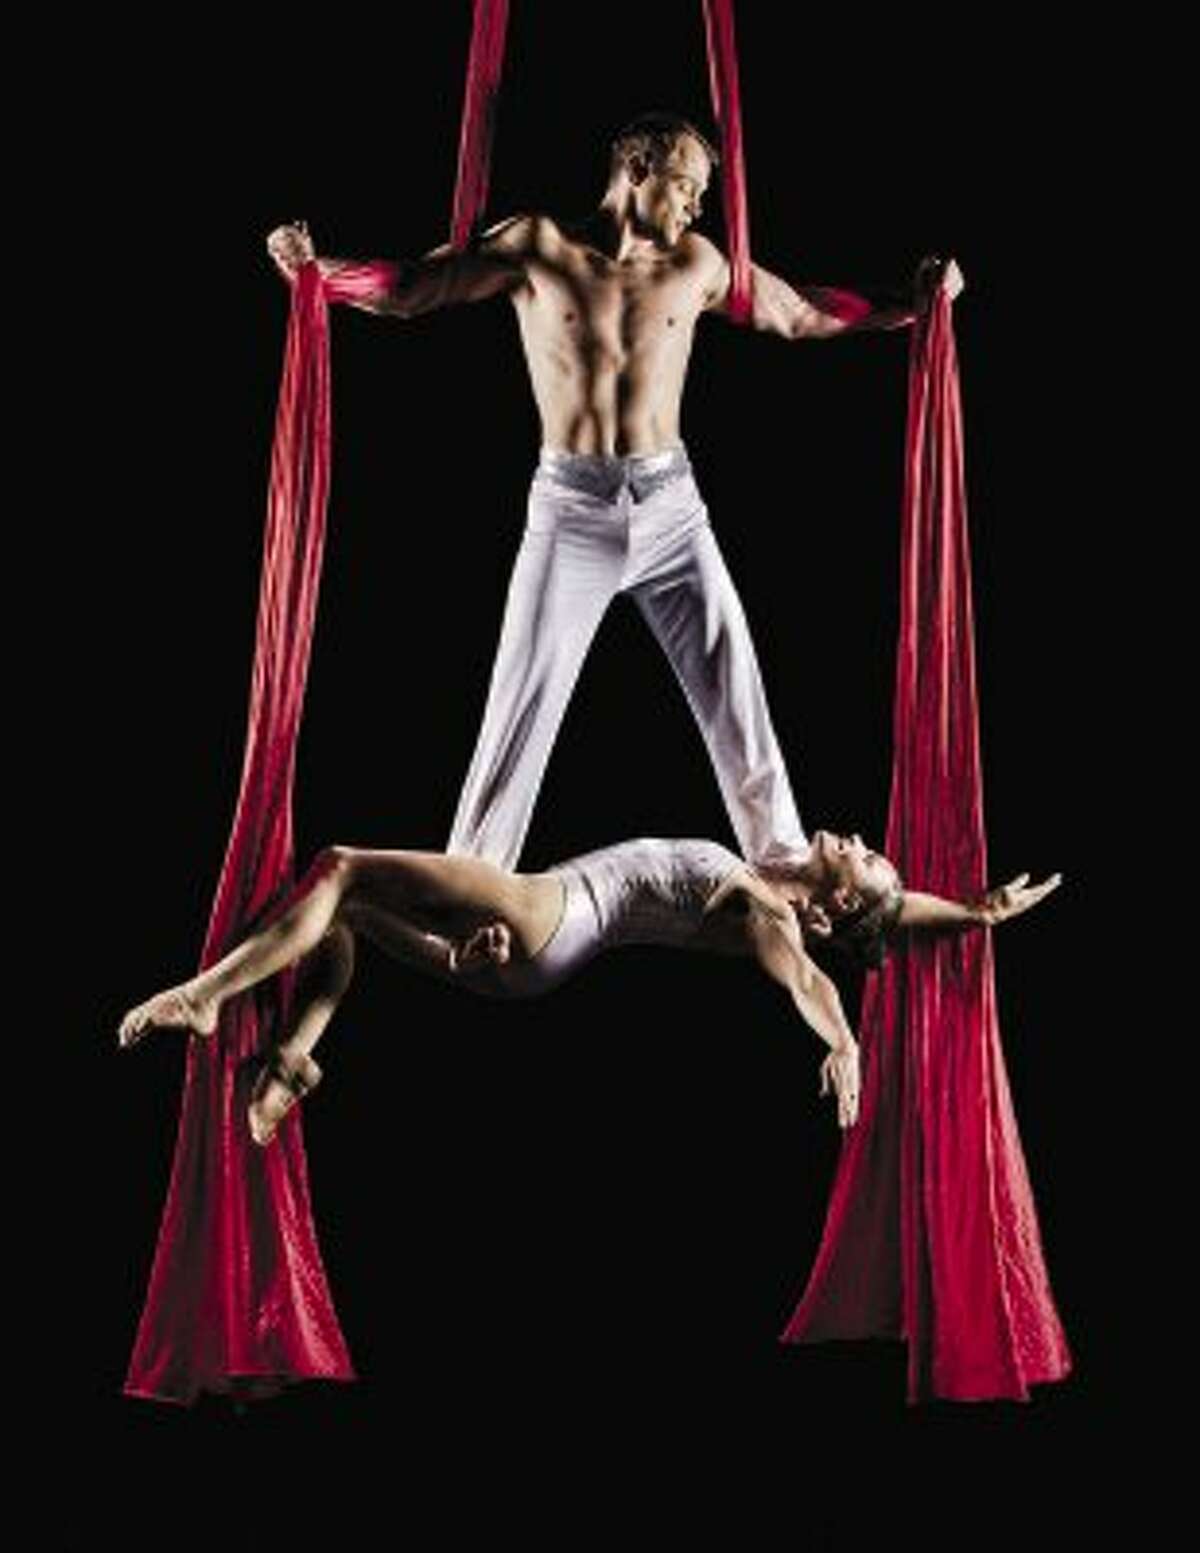 In the concert, audiences will experience a thrilling collaboration of Cirque du Soleil’s style of live, gravity-defying aerial artists, set to classical music performed by the Houston Symphony.